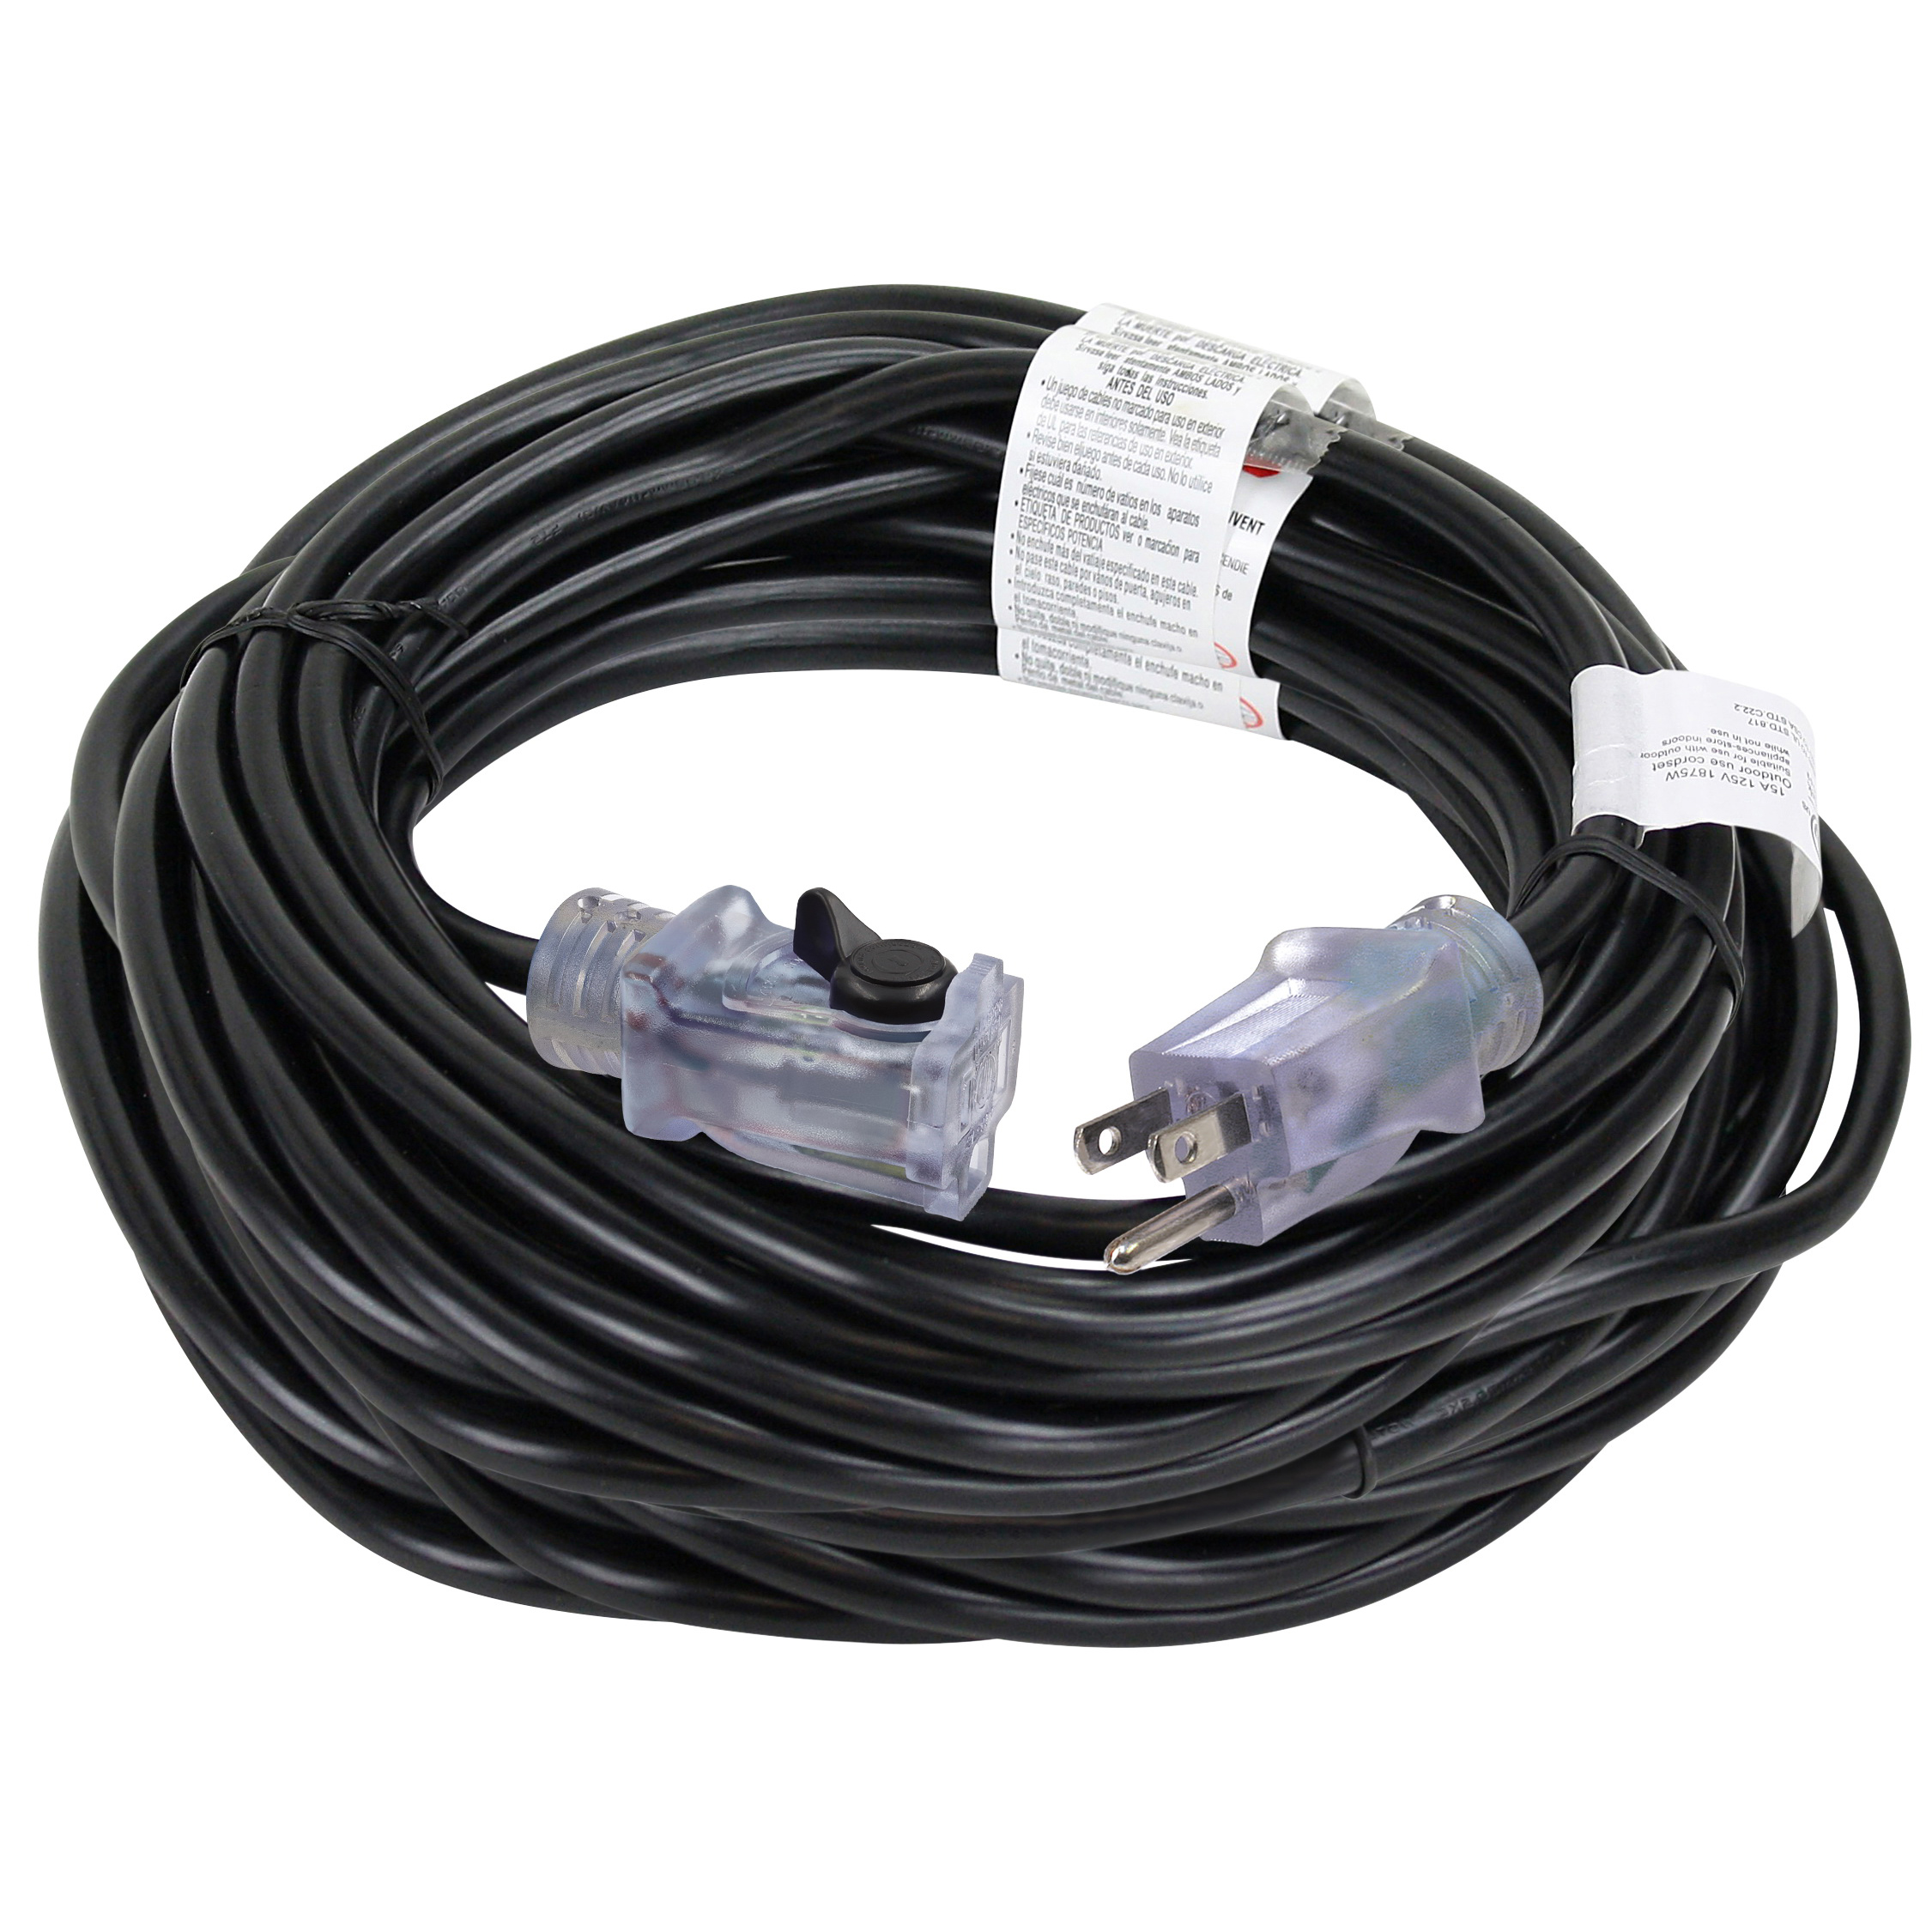 ORECPL502633 Extension Cord, 16 AWG Cable, 80 ft L, 10 A, 125 V, Black